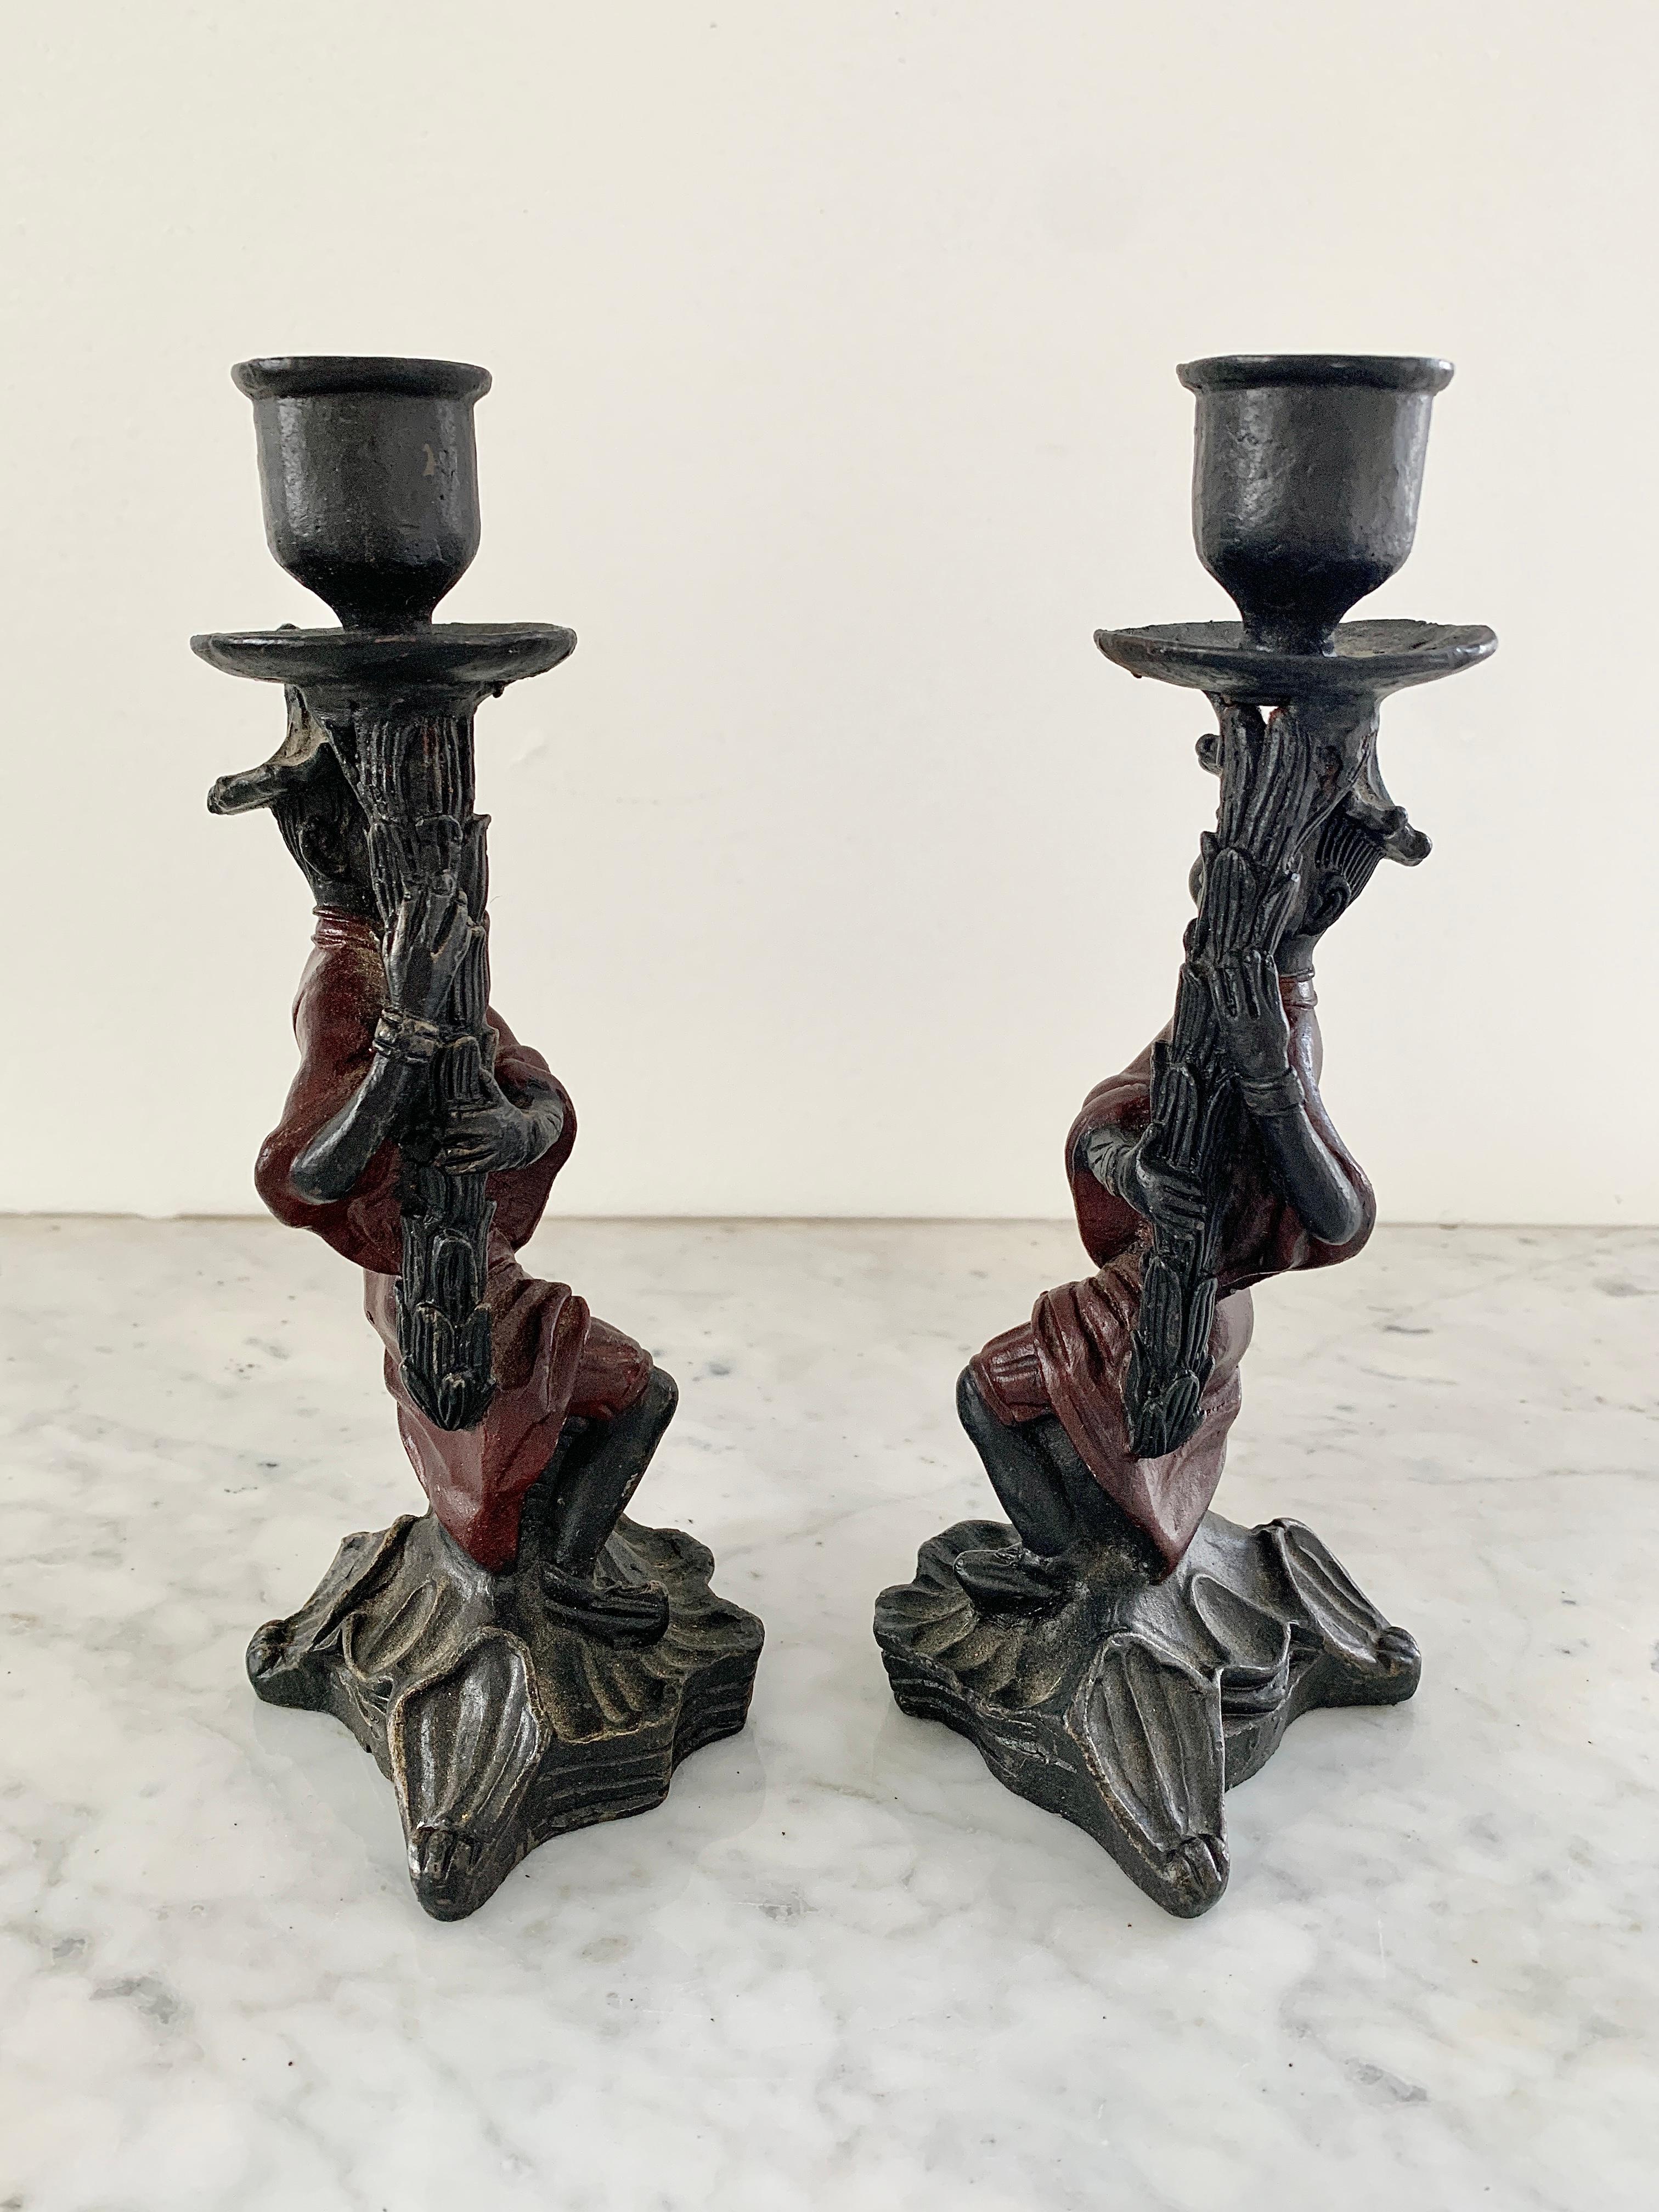 A wonderful pair of cast iron Chinoiserie candle holders.

20th Century

Measures: 3.75